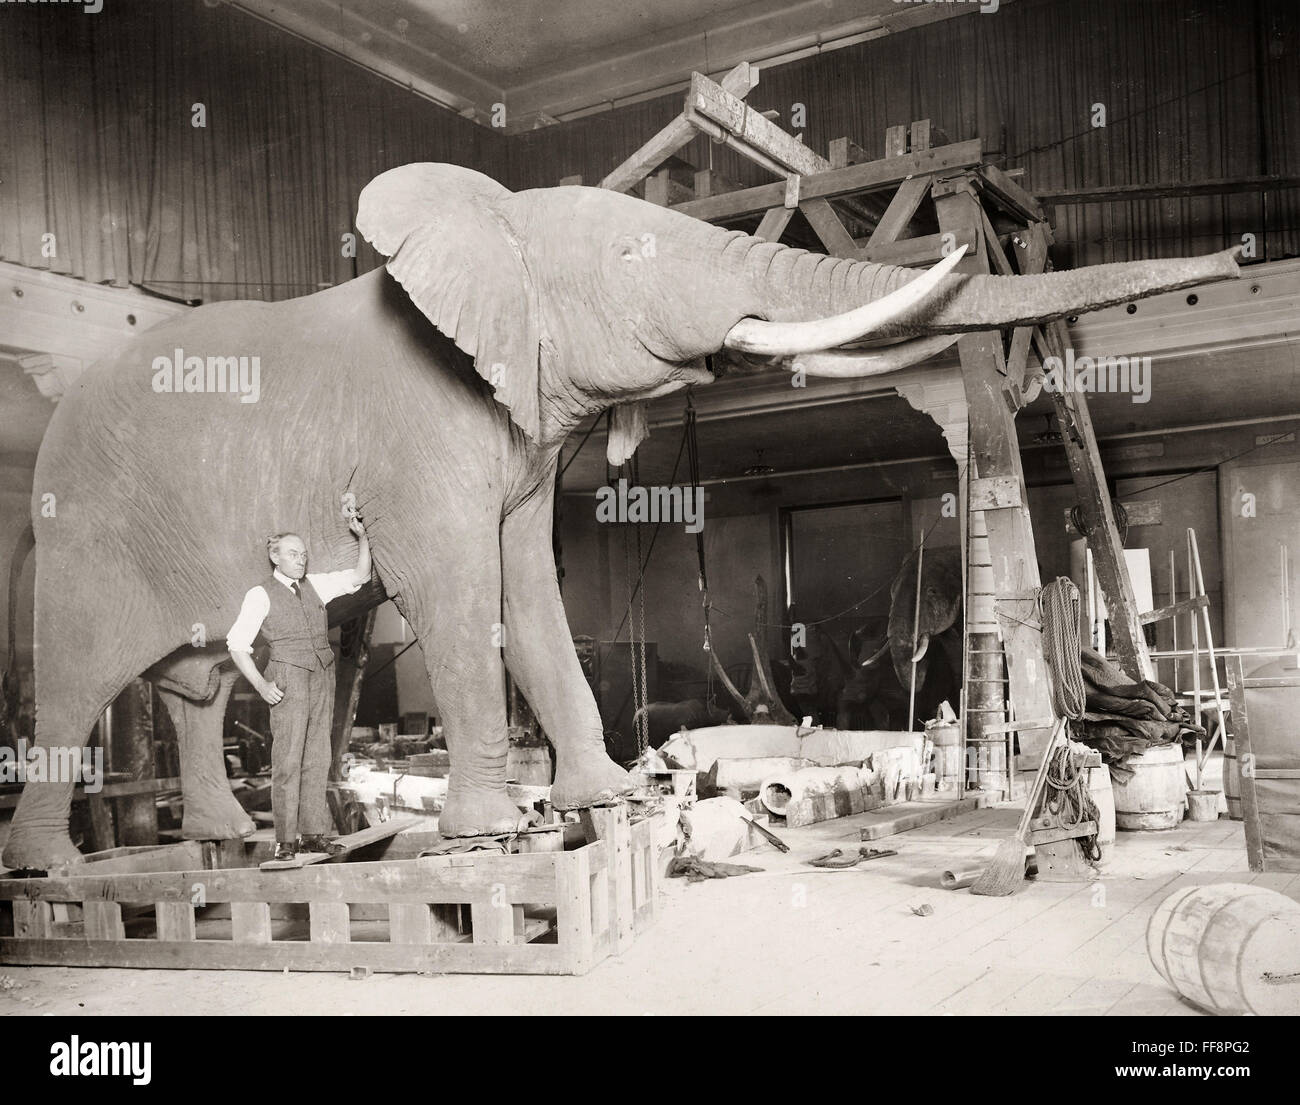 MUSEUM OF NATURAL HISTORY. /nThe taxidermist Carl Akeley with a mounted African elephant at the American Museum of Natural History, New York City, in 1921. Stock Photo